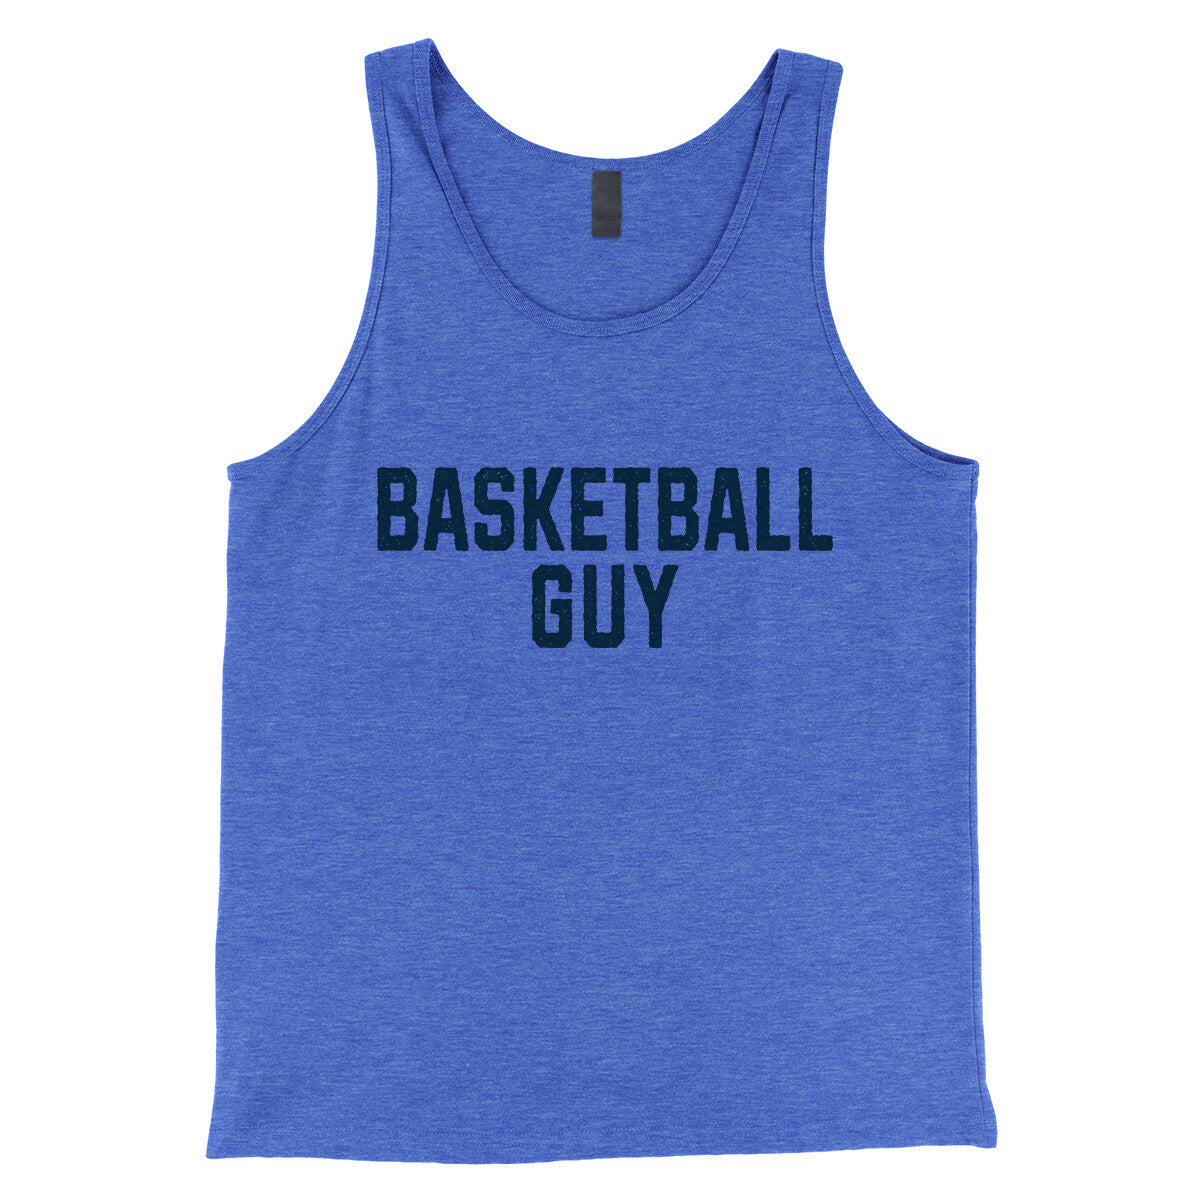 Basketball Guy in True Royal TriBlend Color